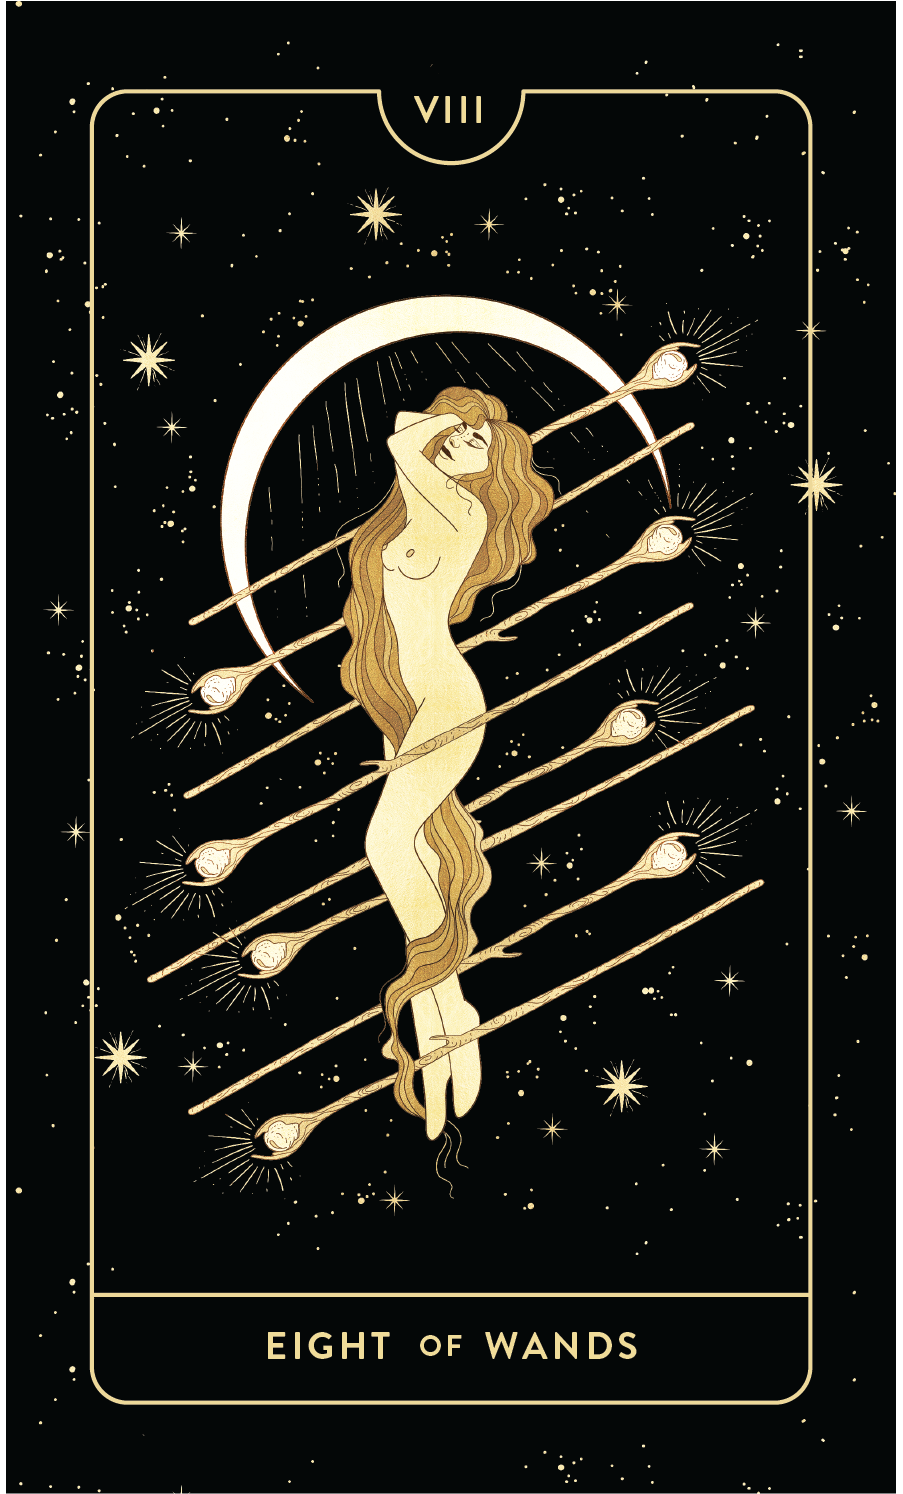 EIGHT OF WANDS